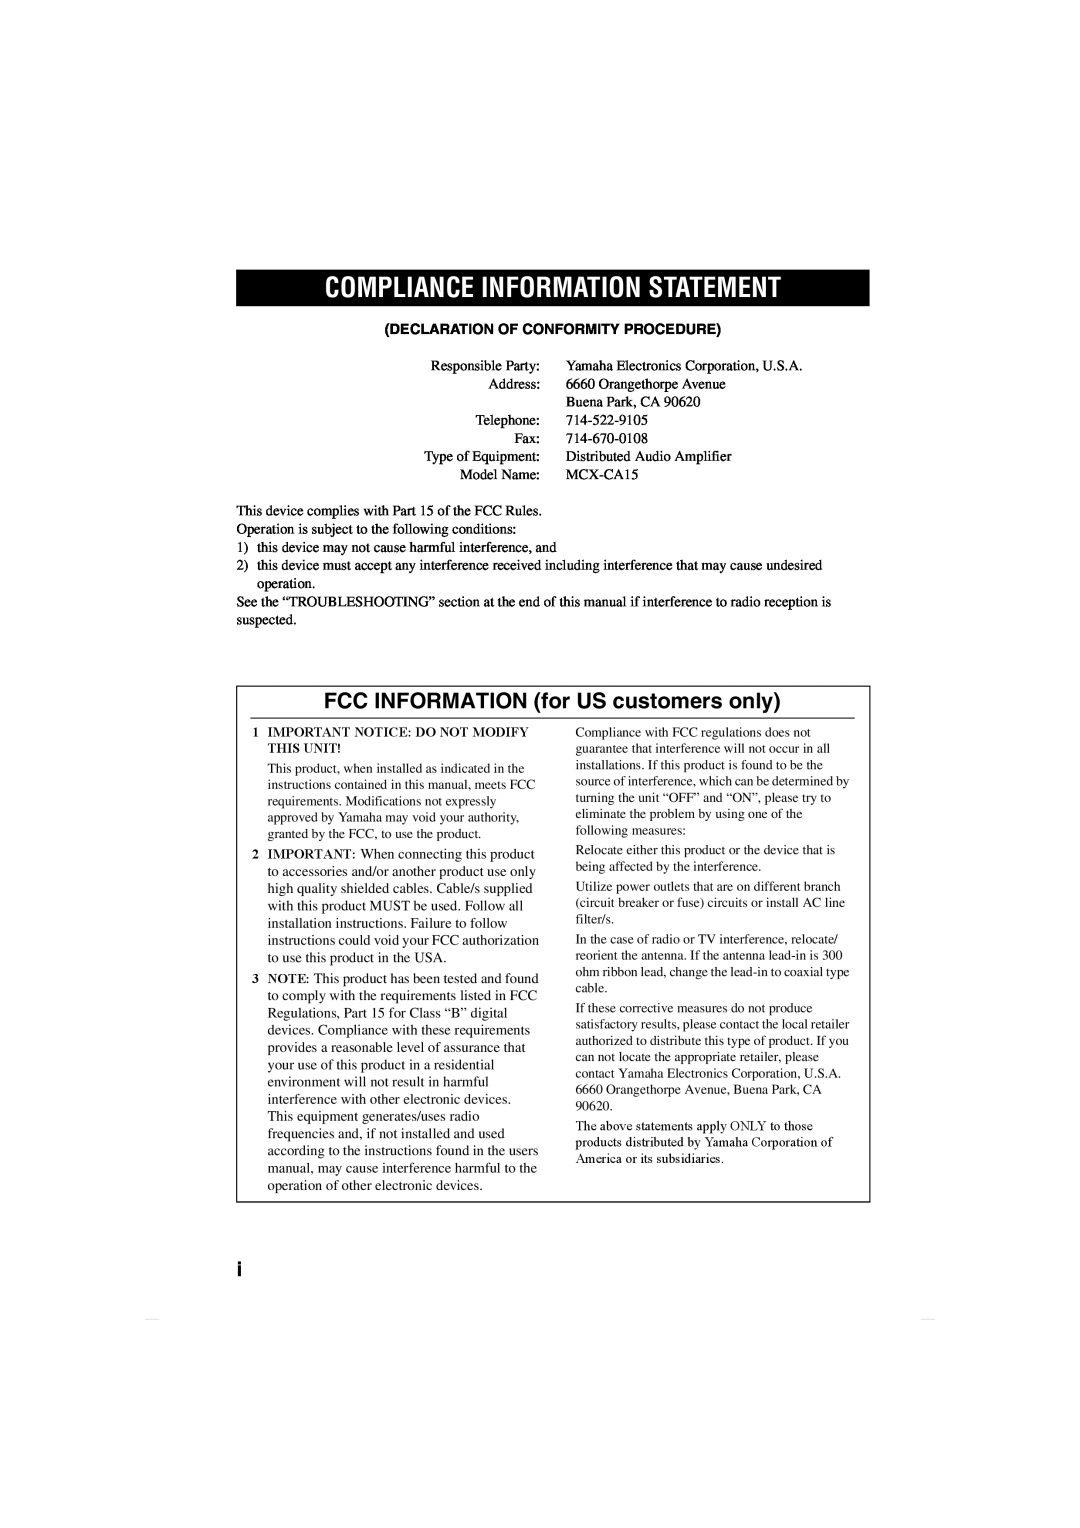 Yamaha MCX-CA15 owner manual Compliance Information Statement, FCC INFORMATION for US customers only 